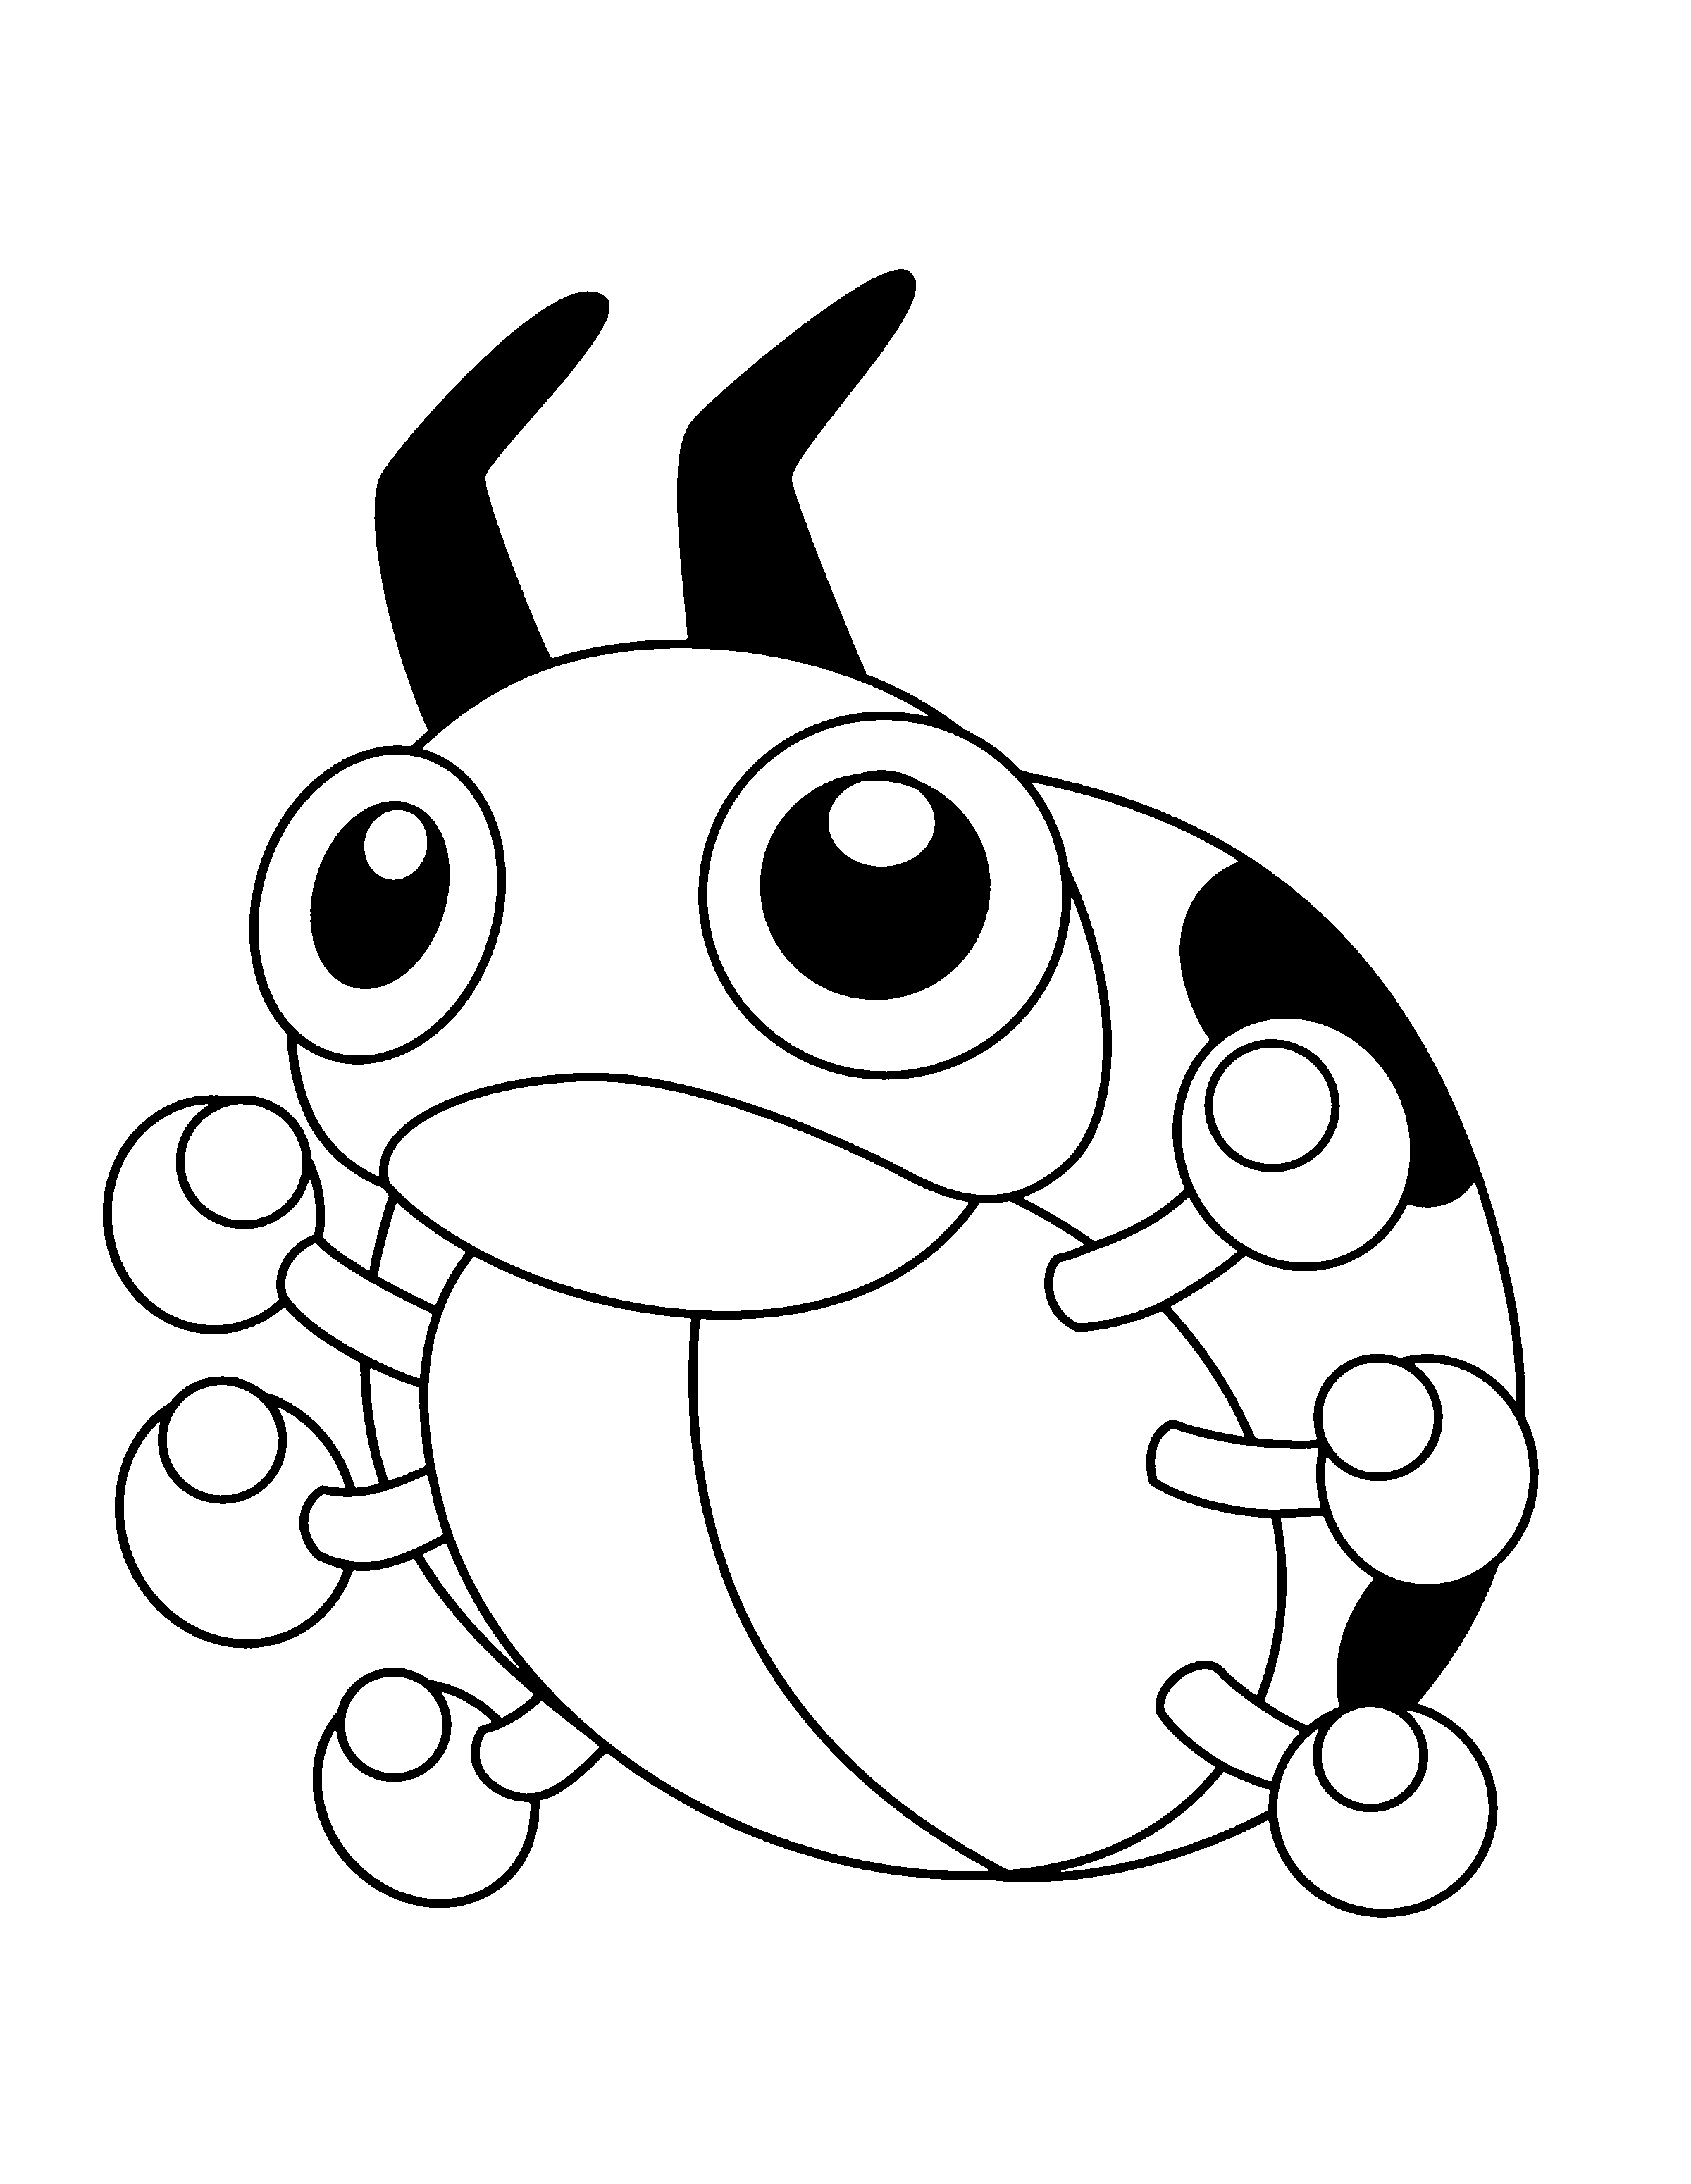 animated-coloring-pages-pokemon-image-0180